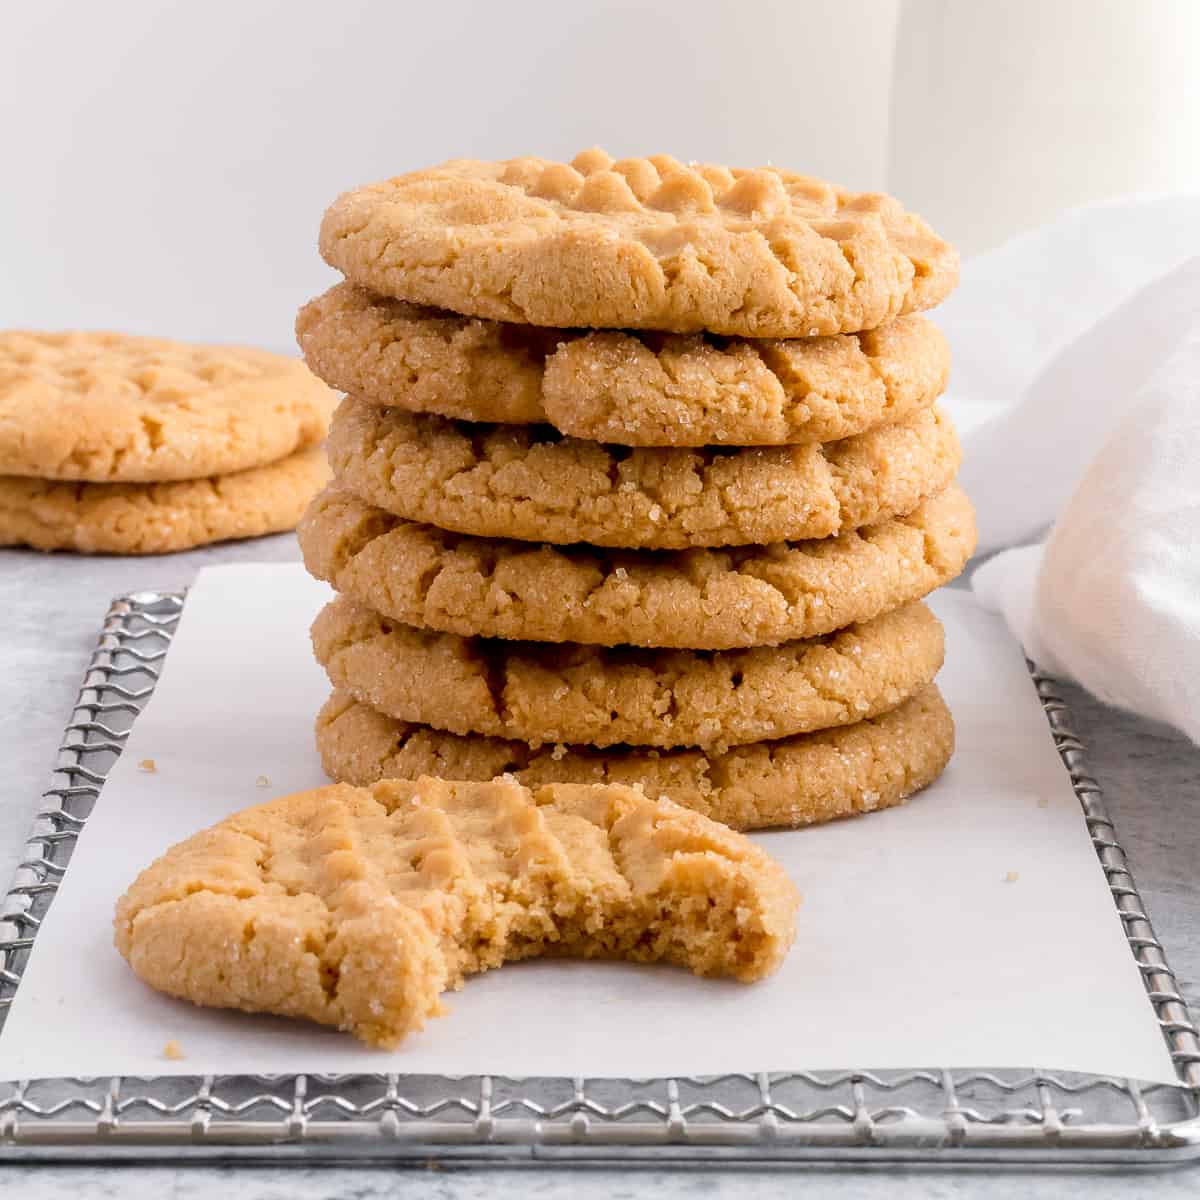 https://mapleandthyme.com/wp-content/uploads/2022/06/small-batch-peanut-butter-cookies-featured-image.jpg